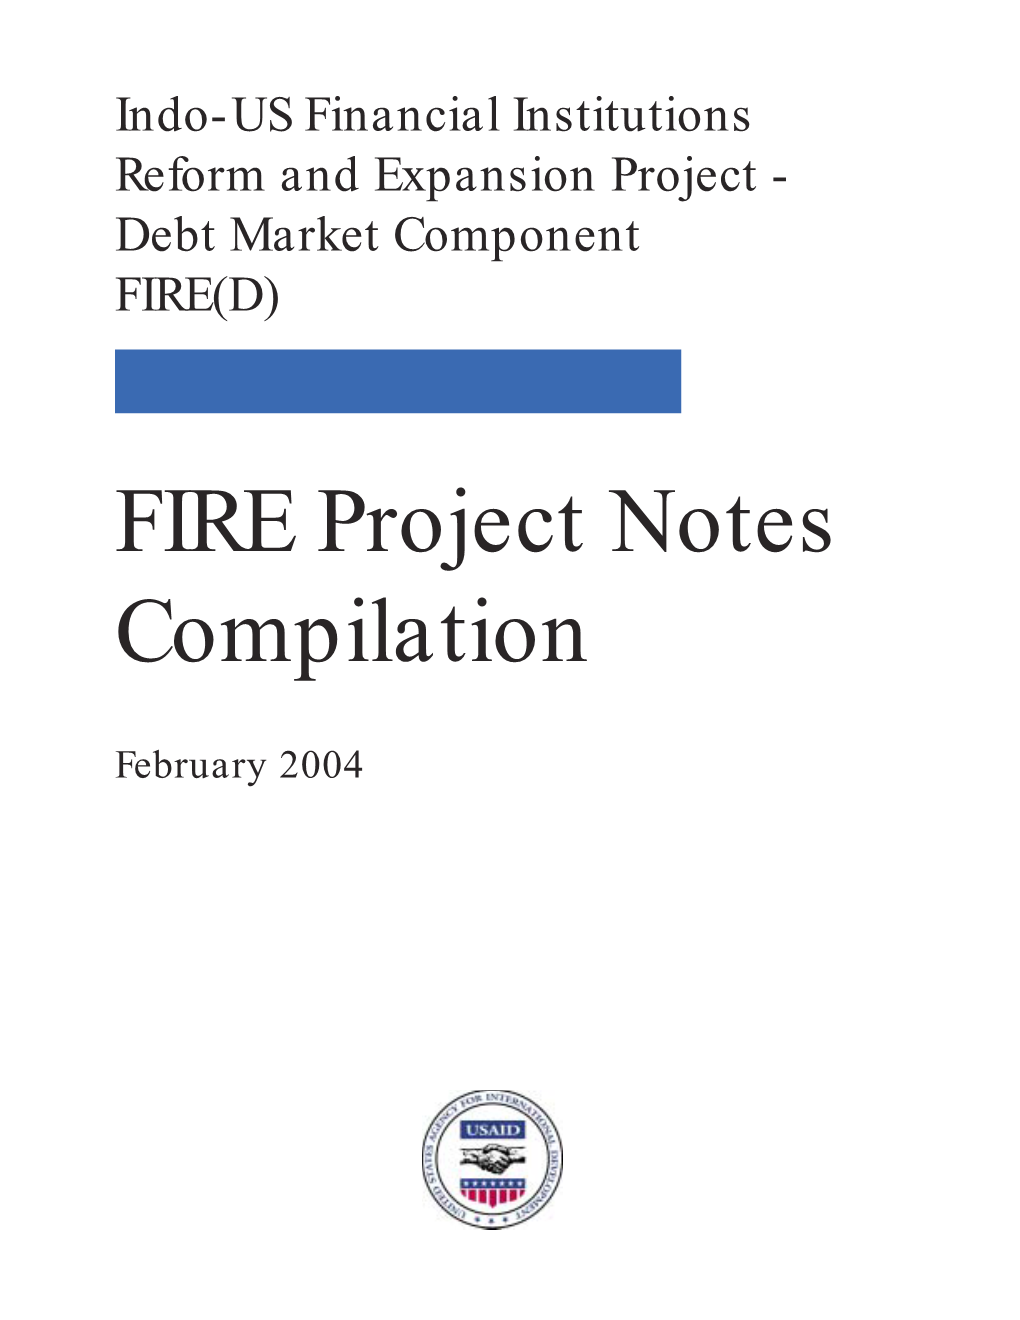 FIRE Project Notes Compilation